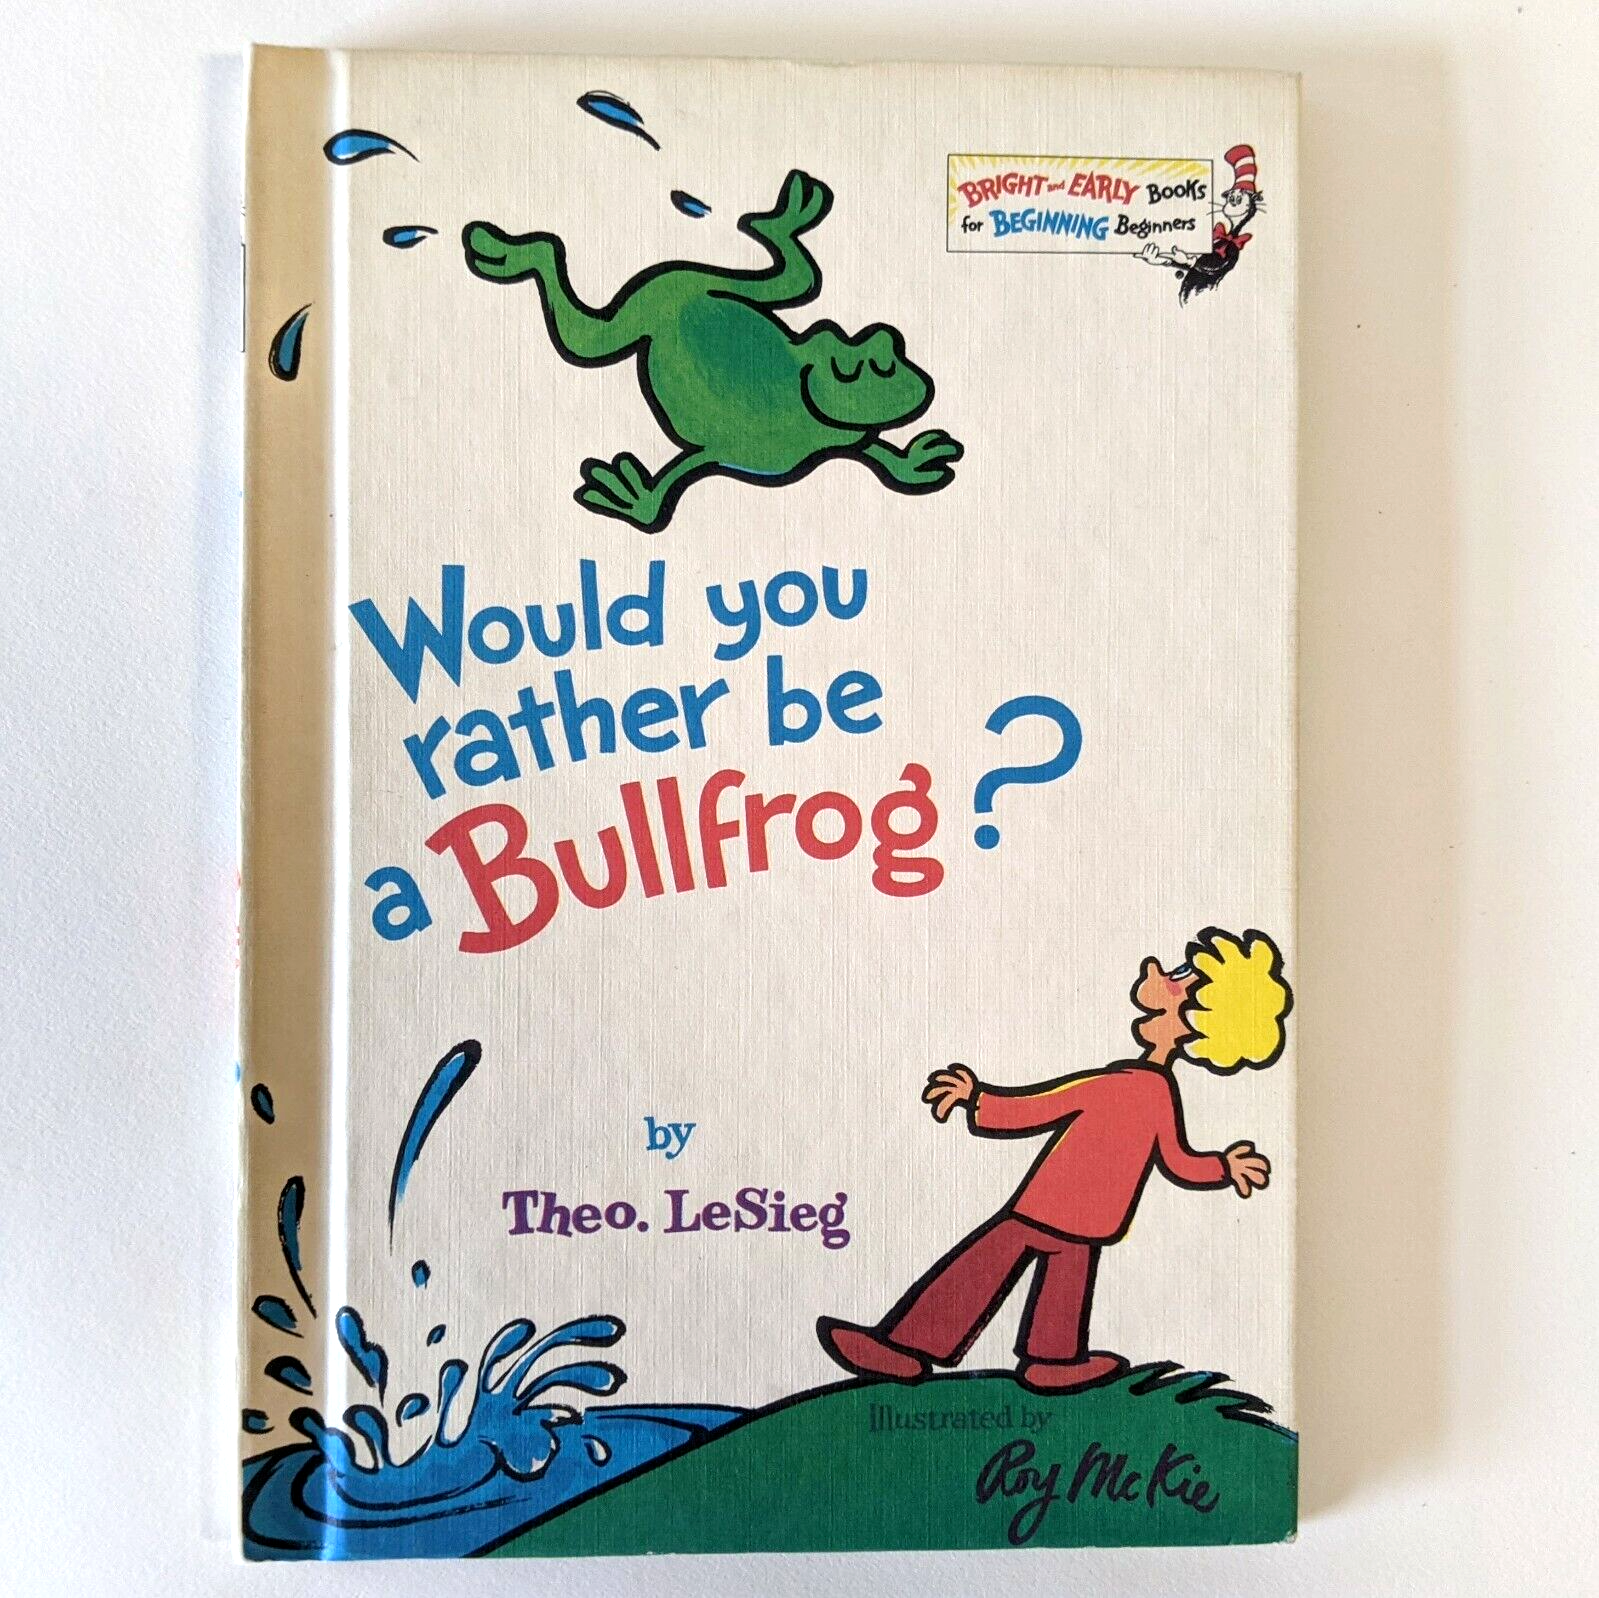 Book would you rather be a bullfrog